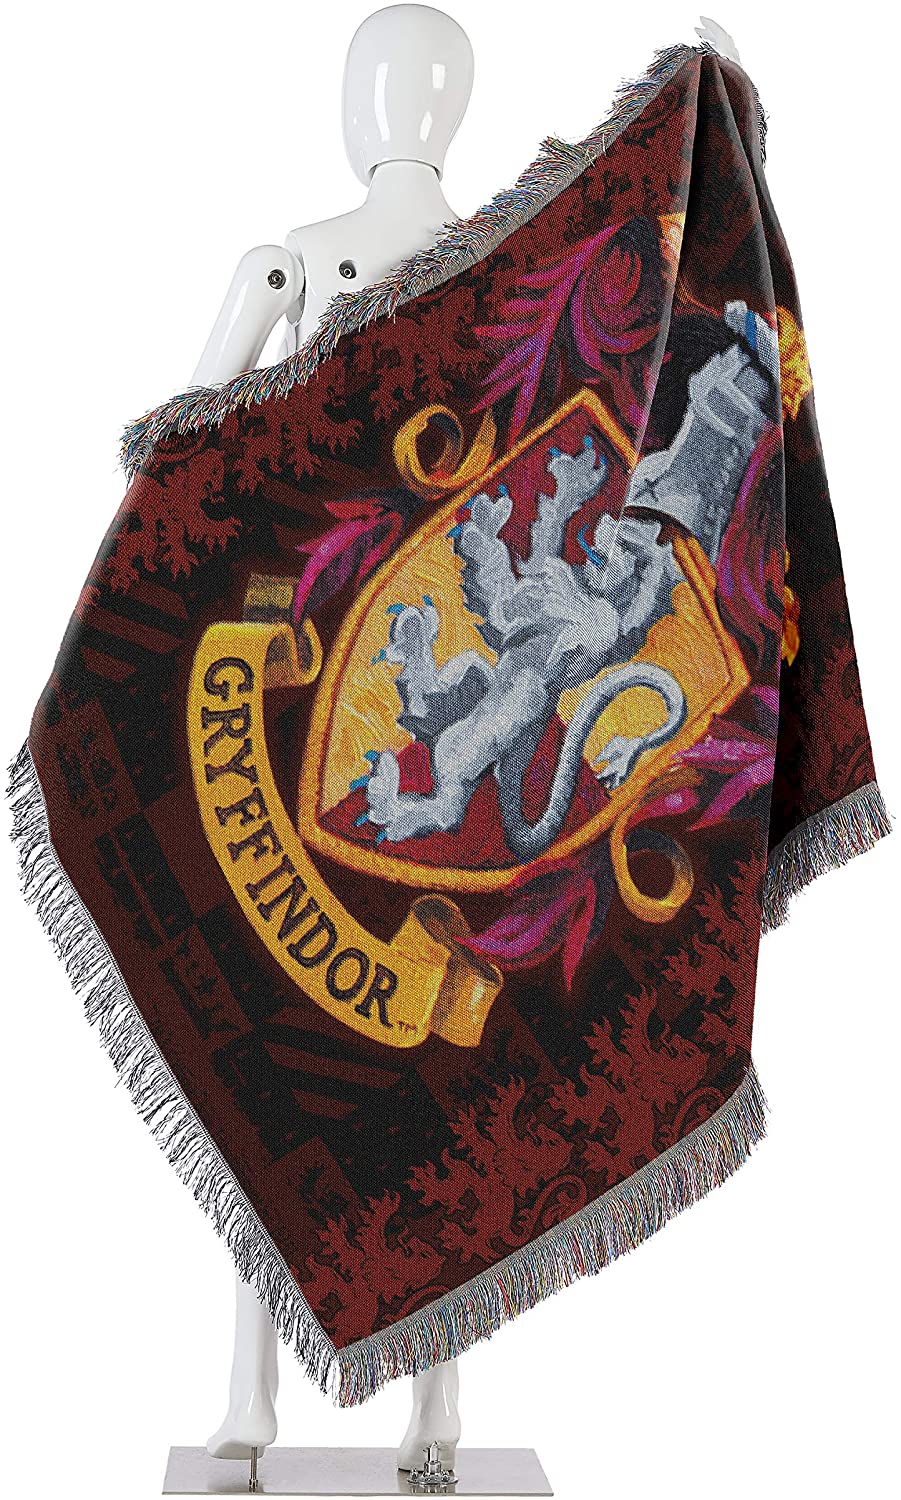 Gryffindor Crest (Harry Potter) Woven Tapestry Throw Blanket